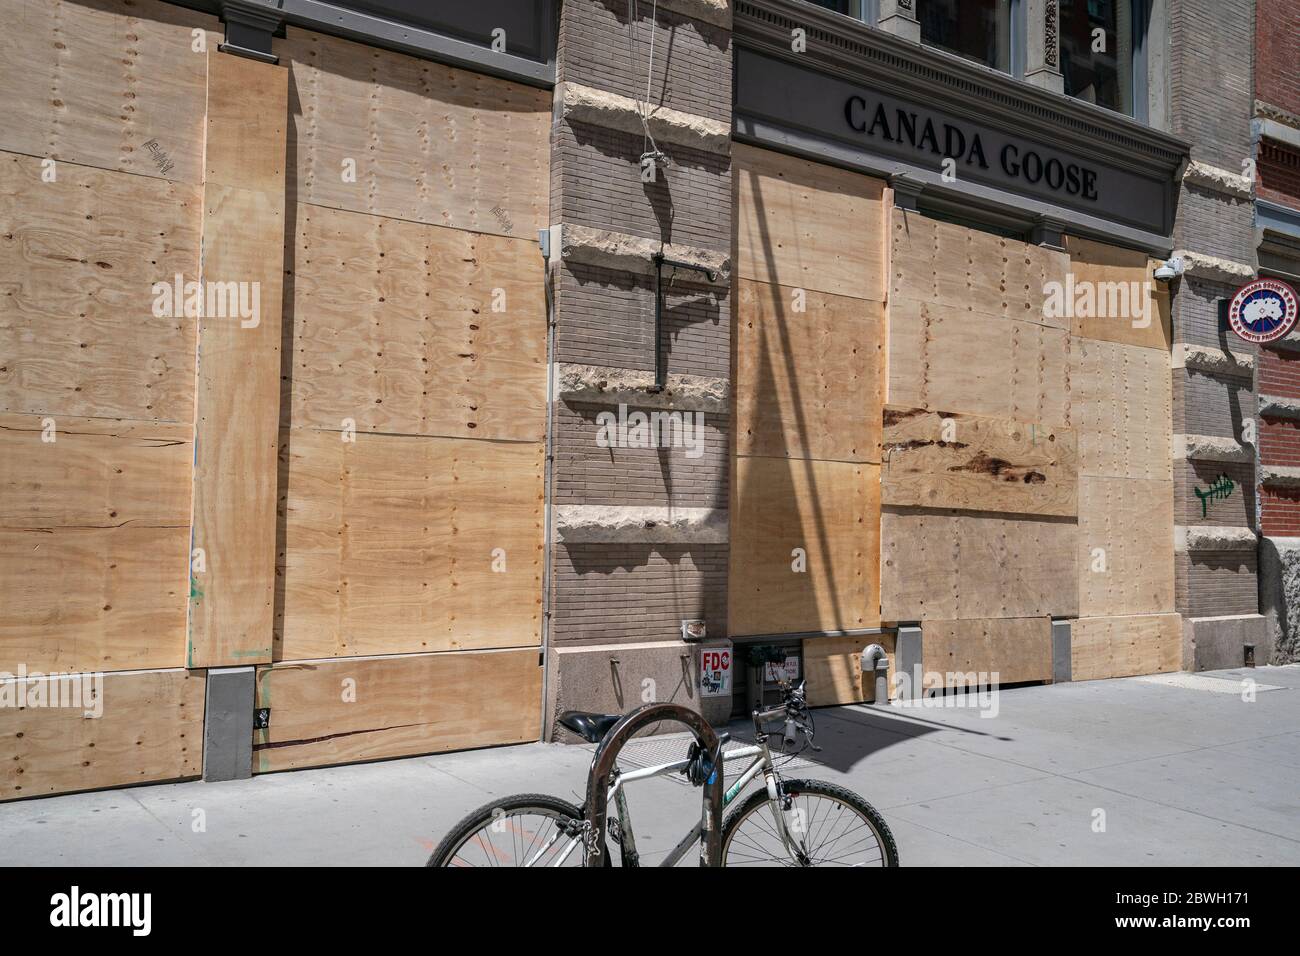 New York, NY - June 1, 2020: Looting and destruction follow peaceful  protests at Sunday night in SoHo area of Manhattan. View of Canada Goose  store Stock Photo - Alamy